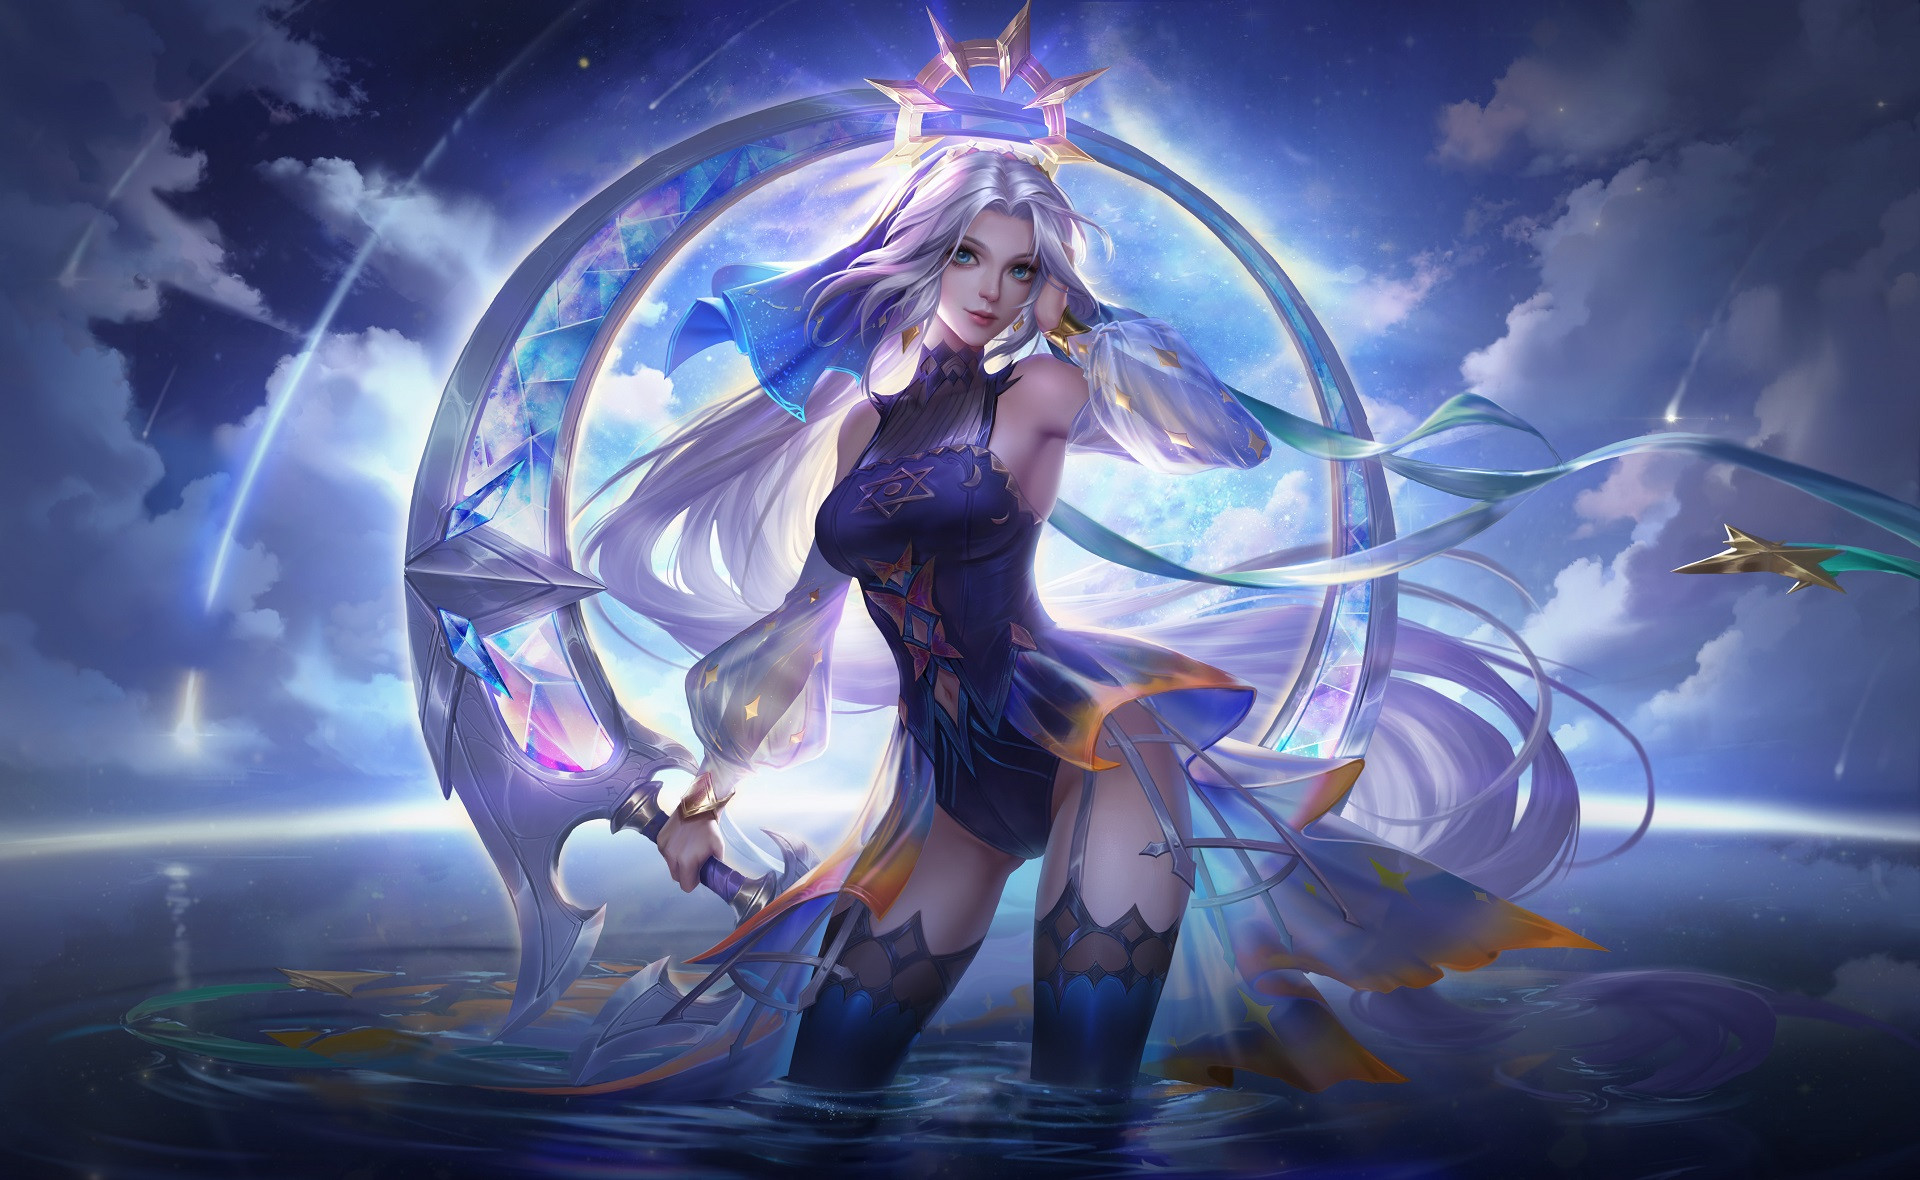 Anime 1920x1180 Arena of Valor video games video game art video game girls video game characters water standing in water